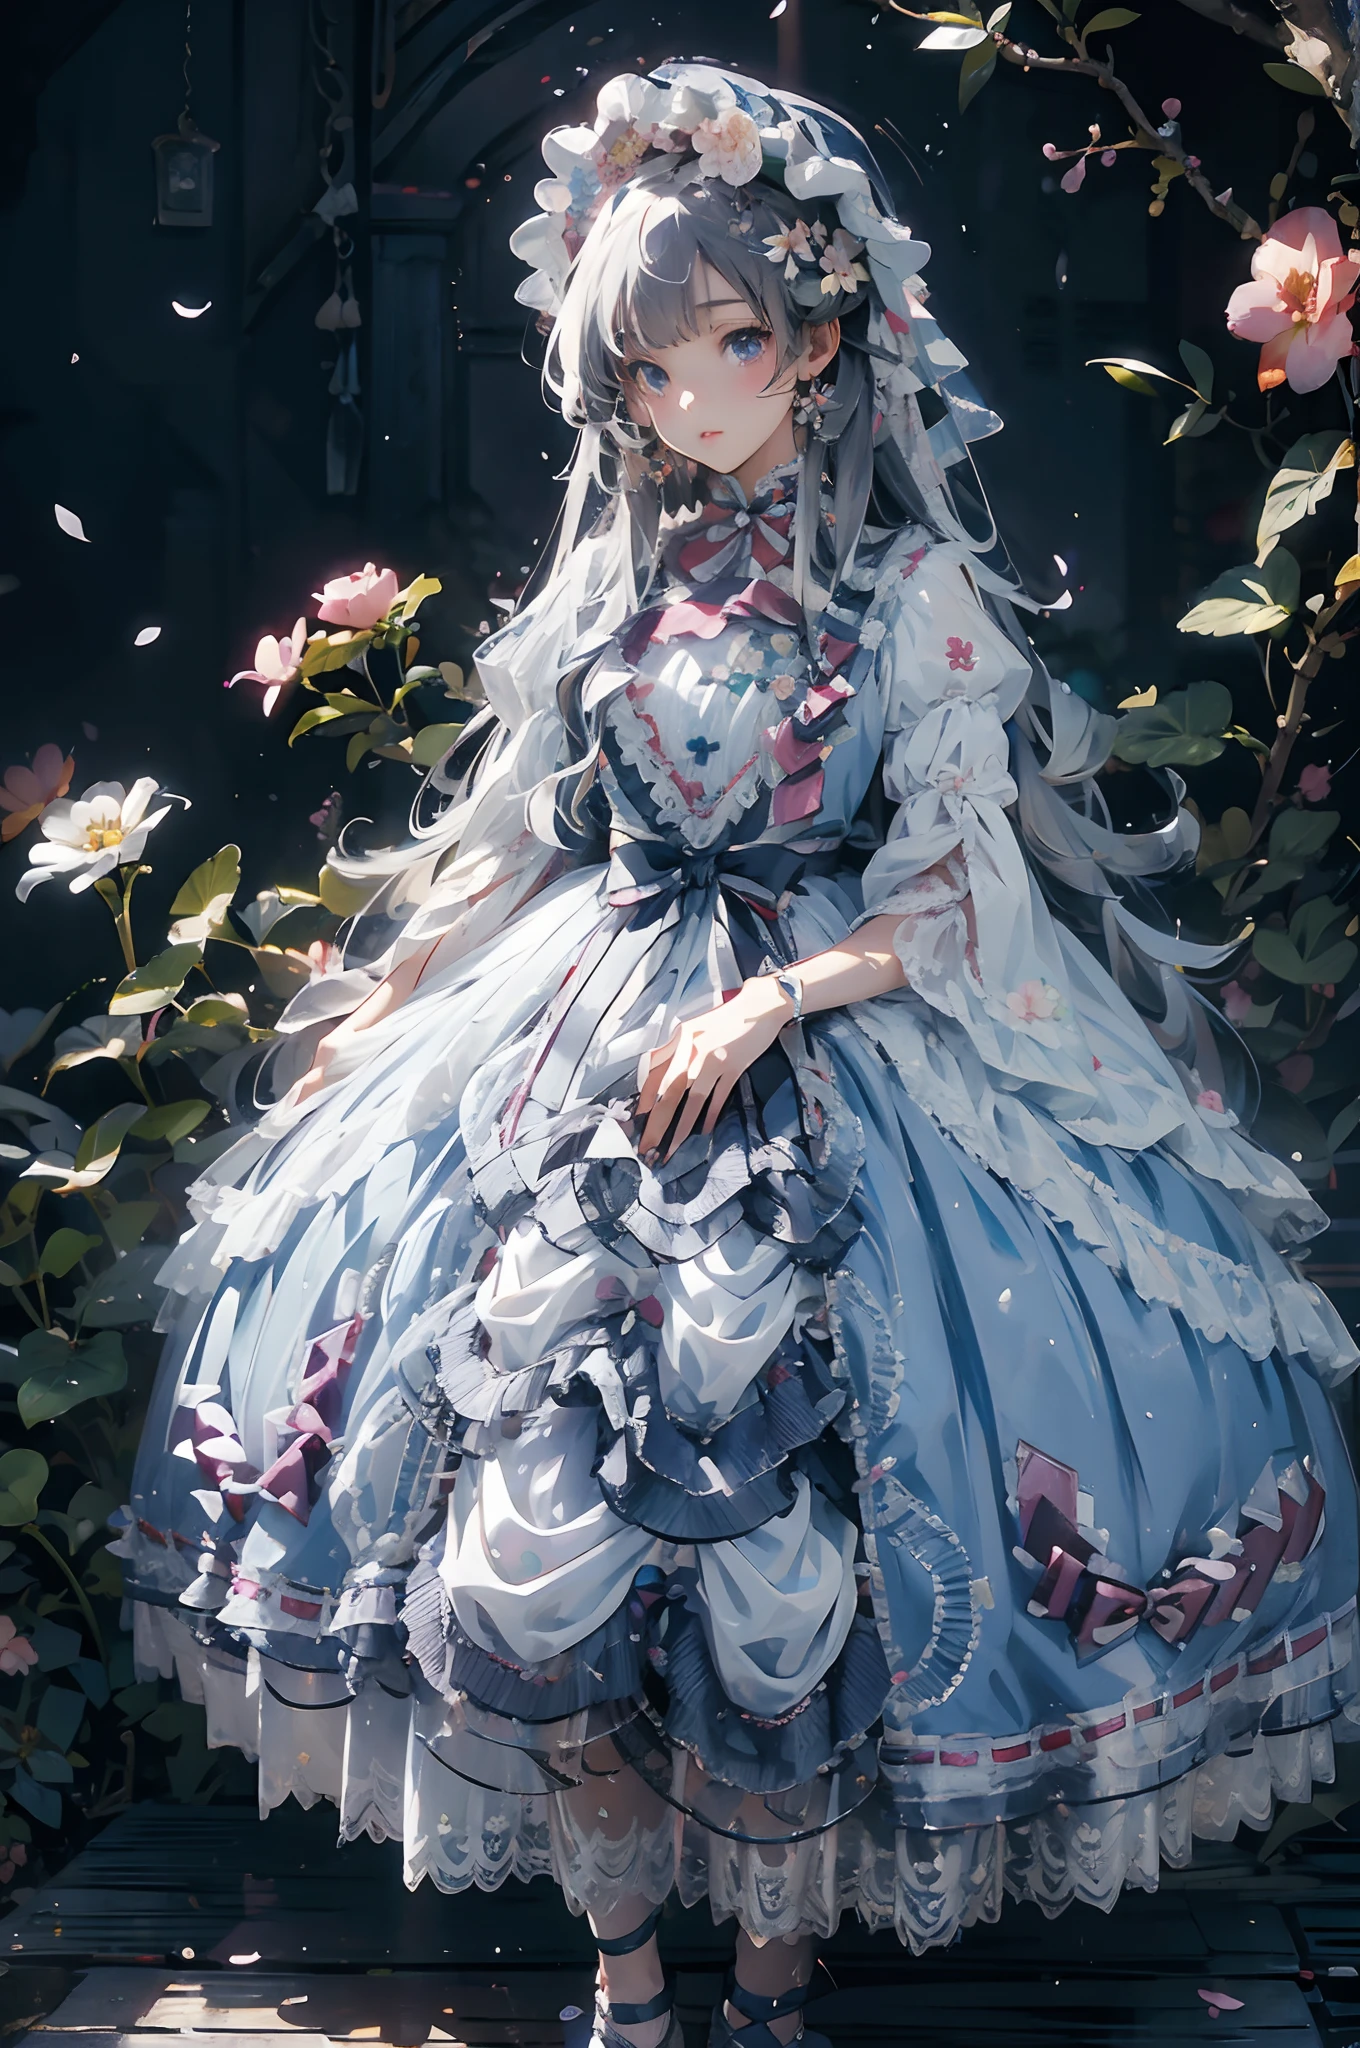 Anime girl with long hair and white dress，There are flowers on the hair, style of anime4 K, Anime art wallpaper 8 K, Anime art wallpaper 4k, Anime art wallpaper 4 K, 4k manga wallpapers, Beautiful anime artwork, Detailed digital anime art, a beautiful anime portrait, Anime wallpaper 4 k, Anime wallpaper 4K, 4K anime wallpaper, clean and meticulous anime art,Full body photo，full bodyesbian